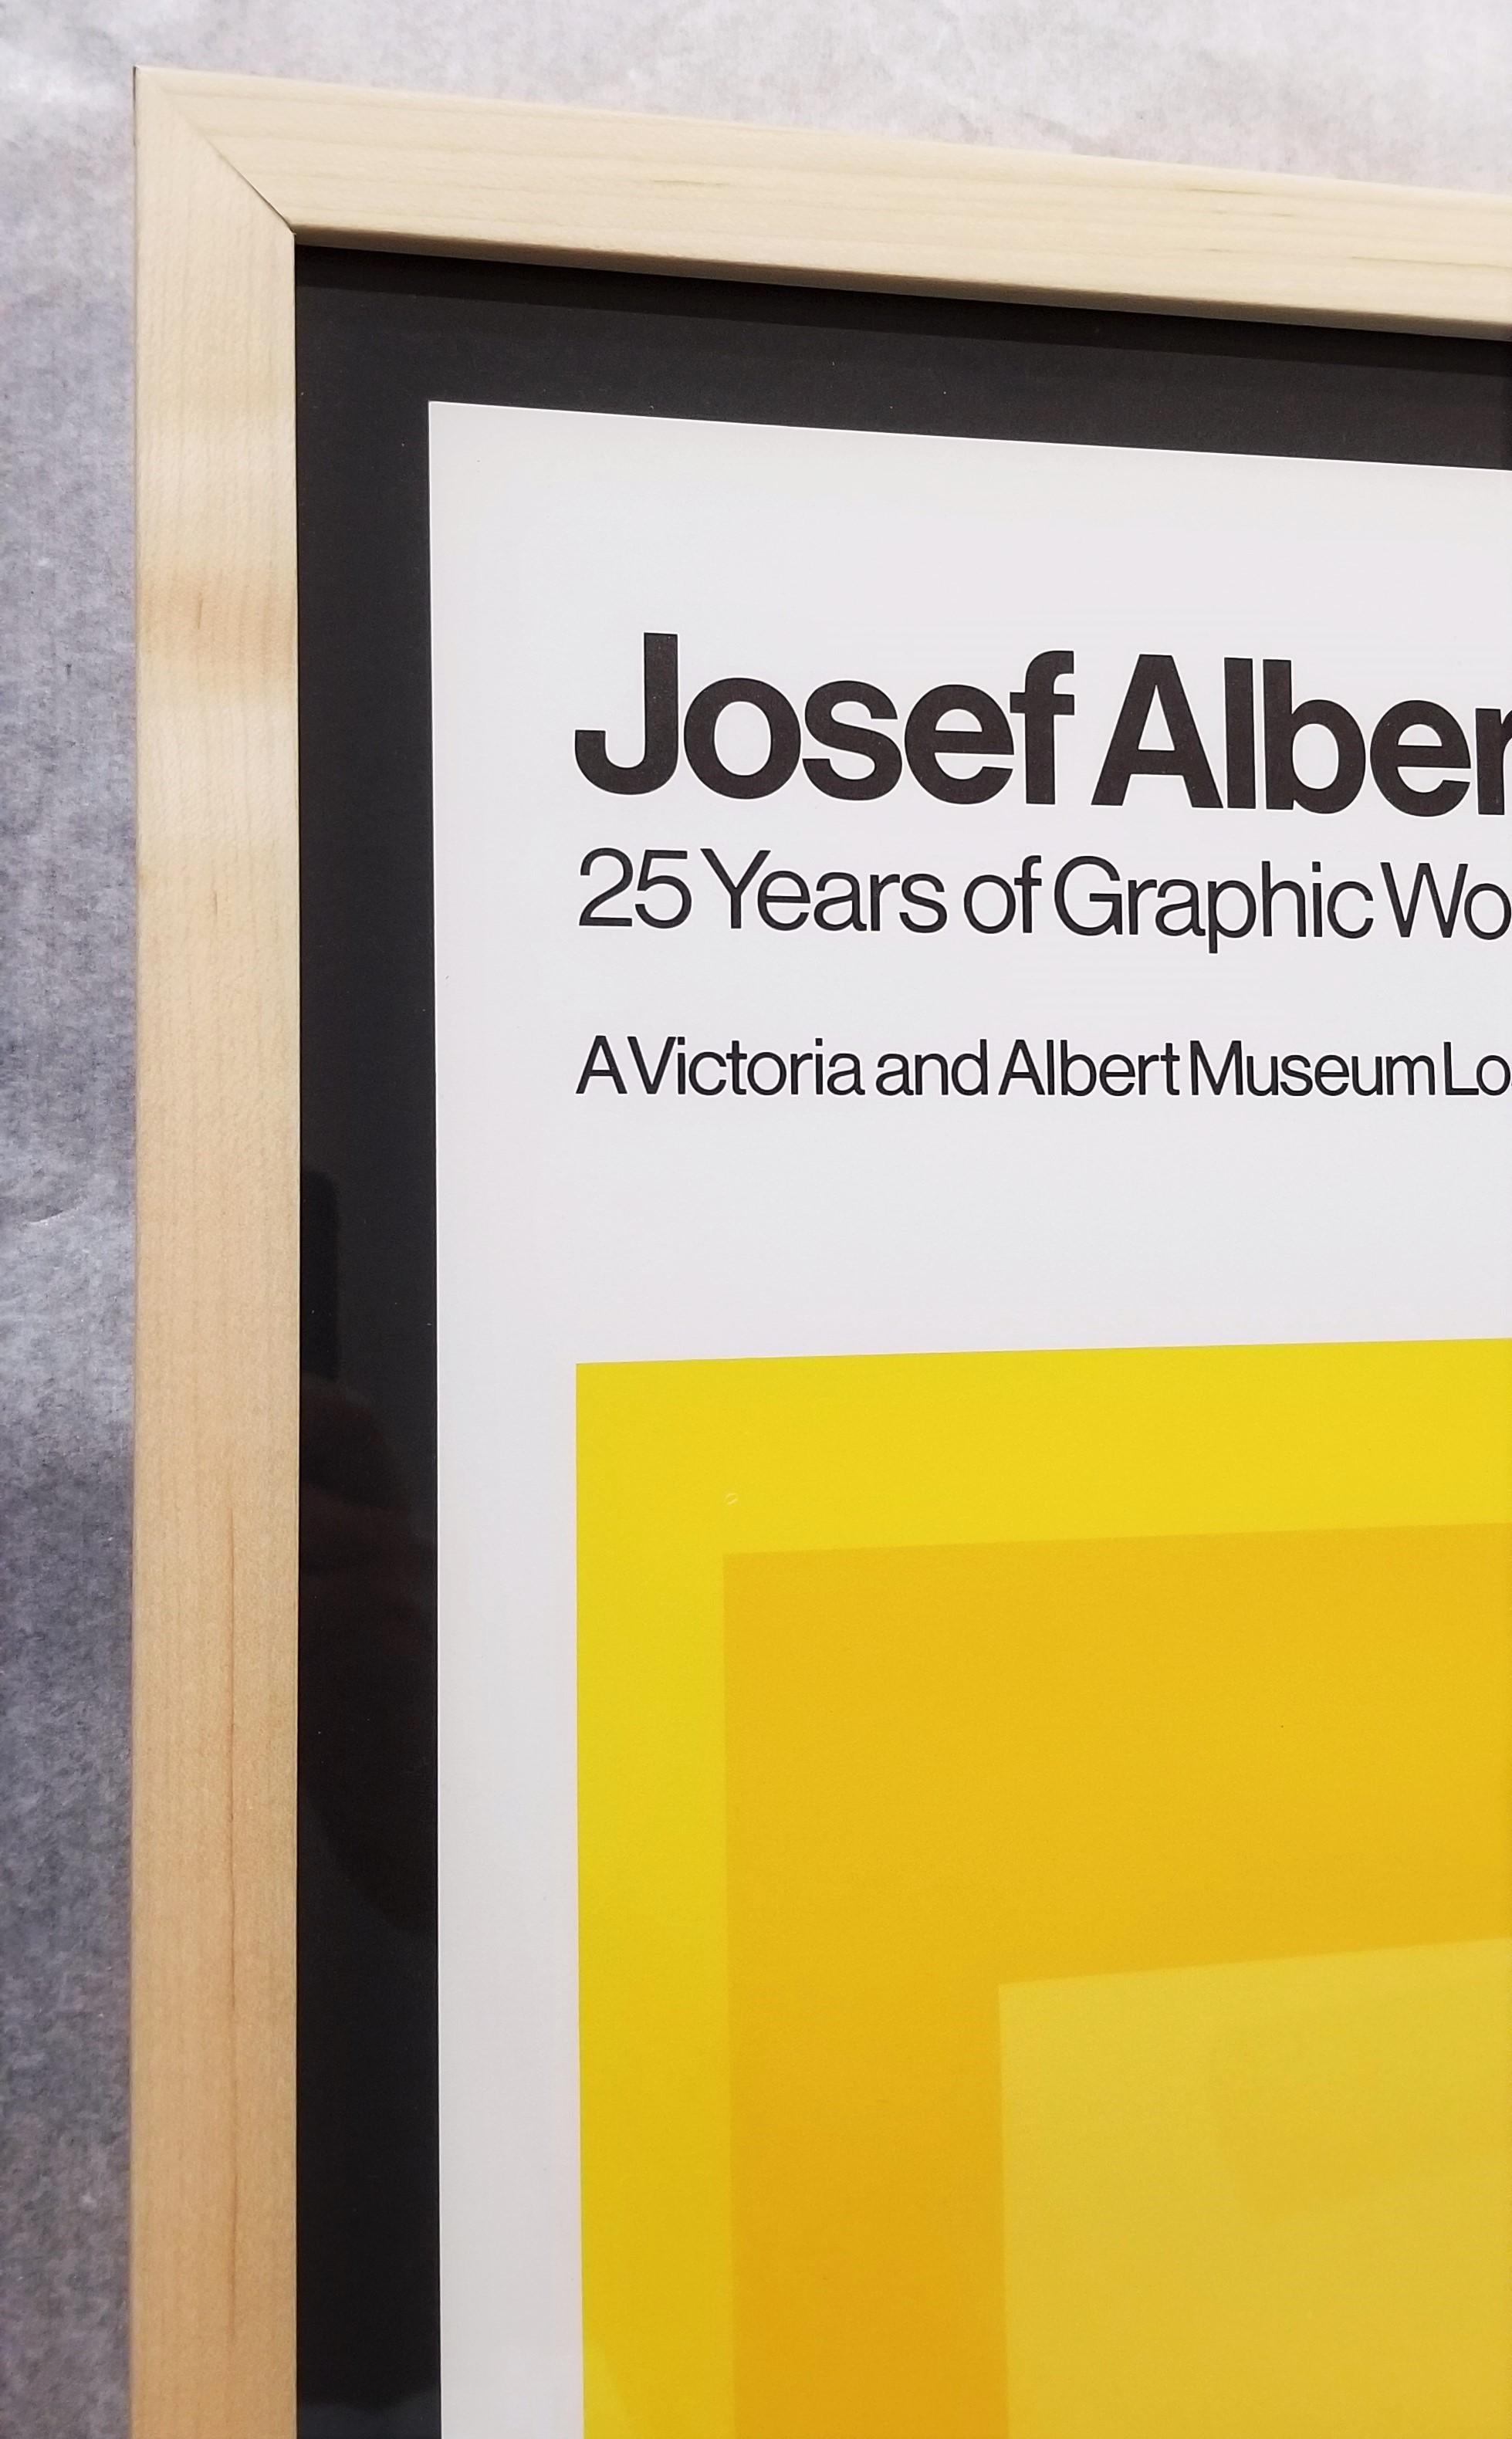 Josef Albers : 25 Years of Graphic Work (Midnight and Noon VII) Poster /// Square en vente 4